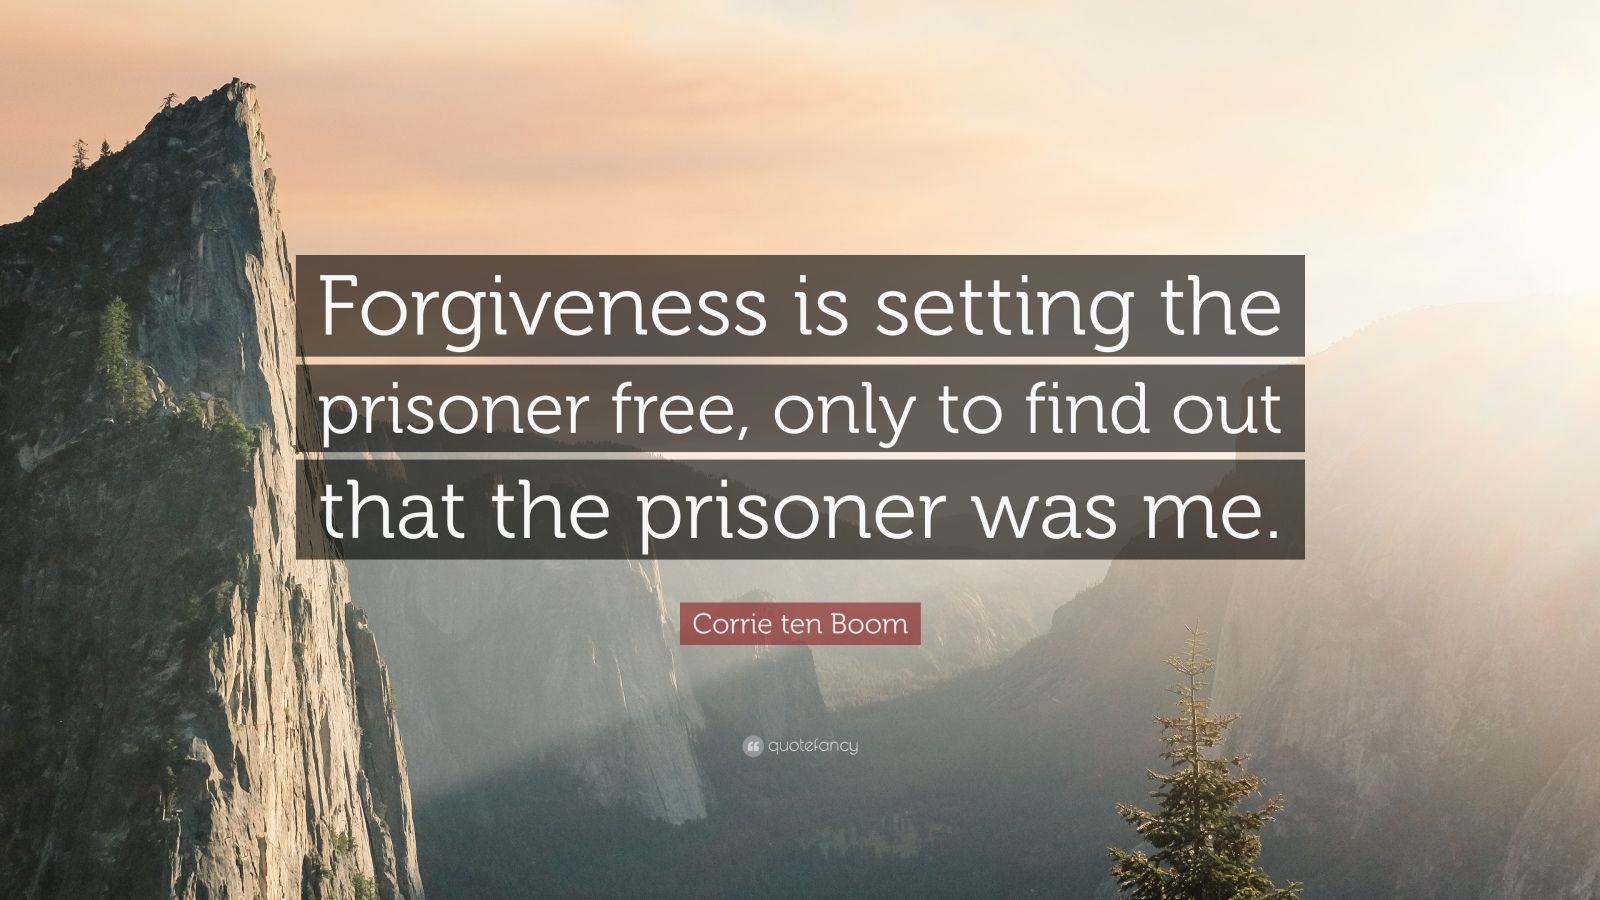 Corrie ten Boom Quote: “Forgiveness is setting the prisoner free, only